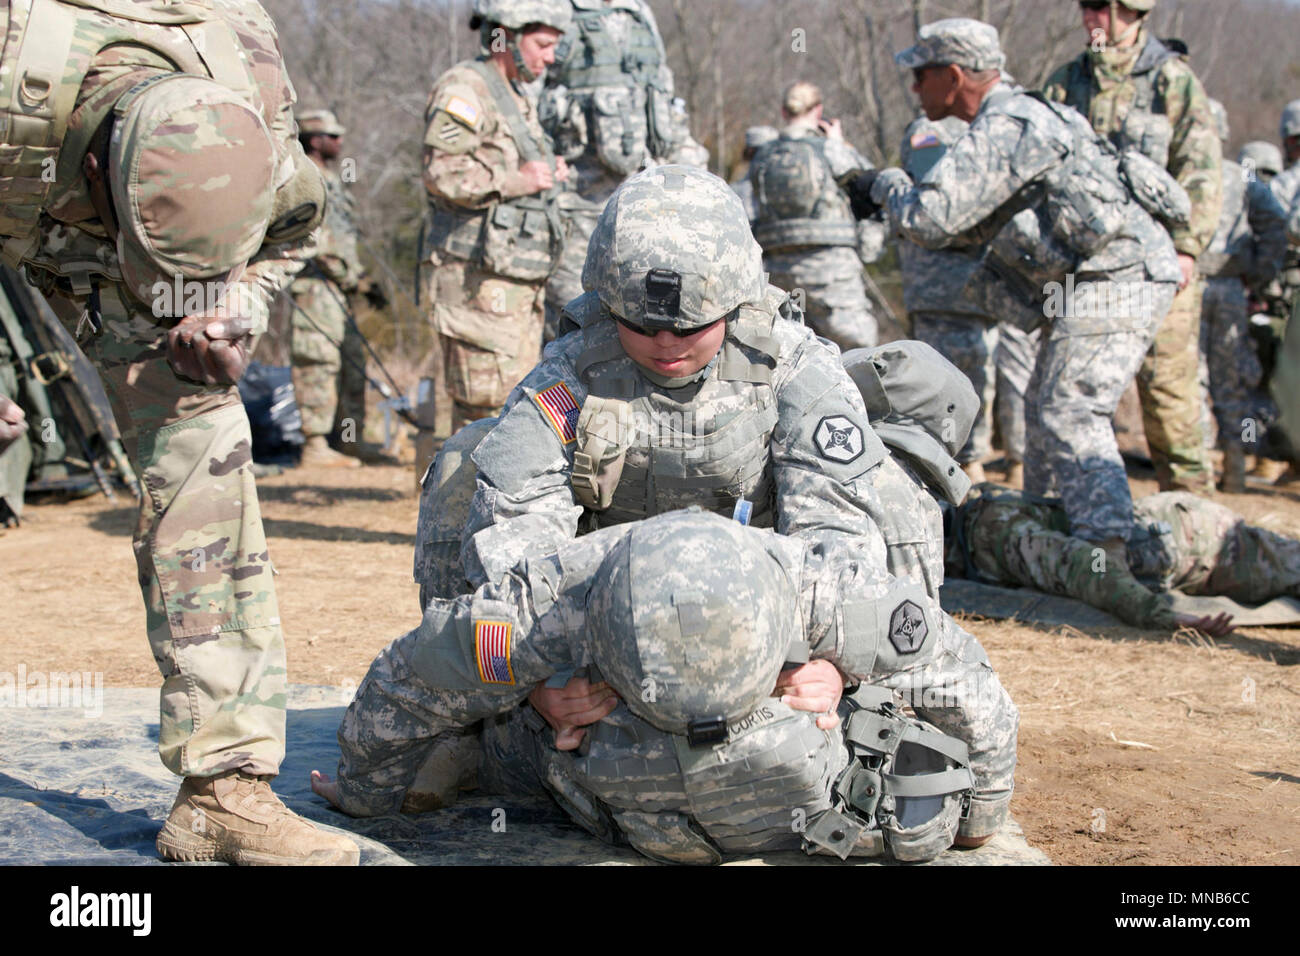 A U.S. Army Reserve Soldier performs a buddy carry on a simulated casualty during the Combat Support Training Exercise (CSTX) 78-18-03 at Fort Knox, Kentucky, March 15, 2018. CSTX 78-18-03 is a training exercise that ensures America's Army Reserve units and Soldiers are trained and ready to deploy on short-notice and bring capable, combat-ready and lethal firepower in support of the Army and our joint partners anywhere in the world. (U.S. Army Reserve Stock Photo